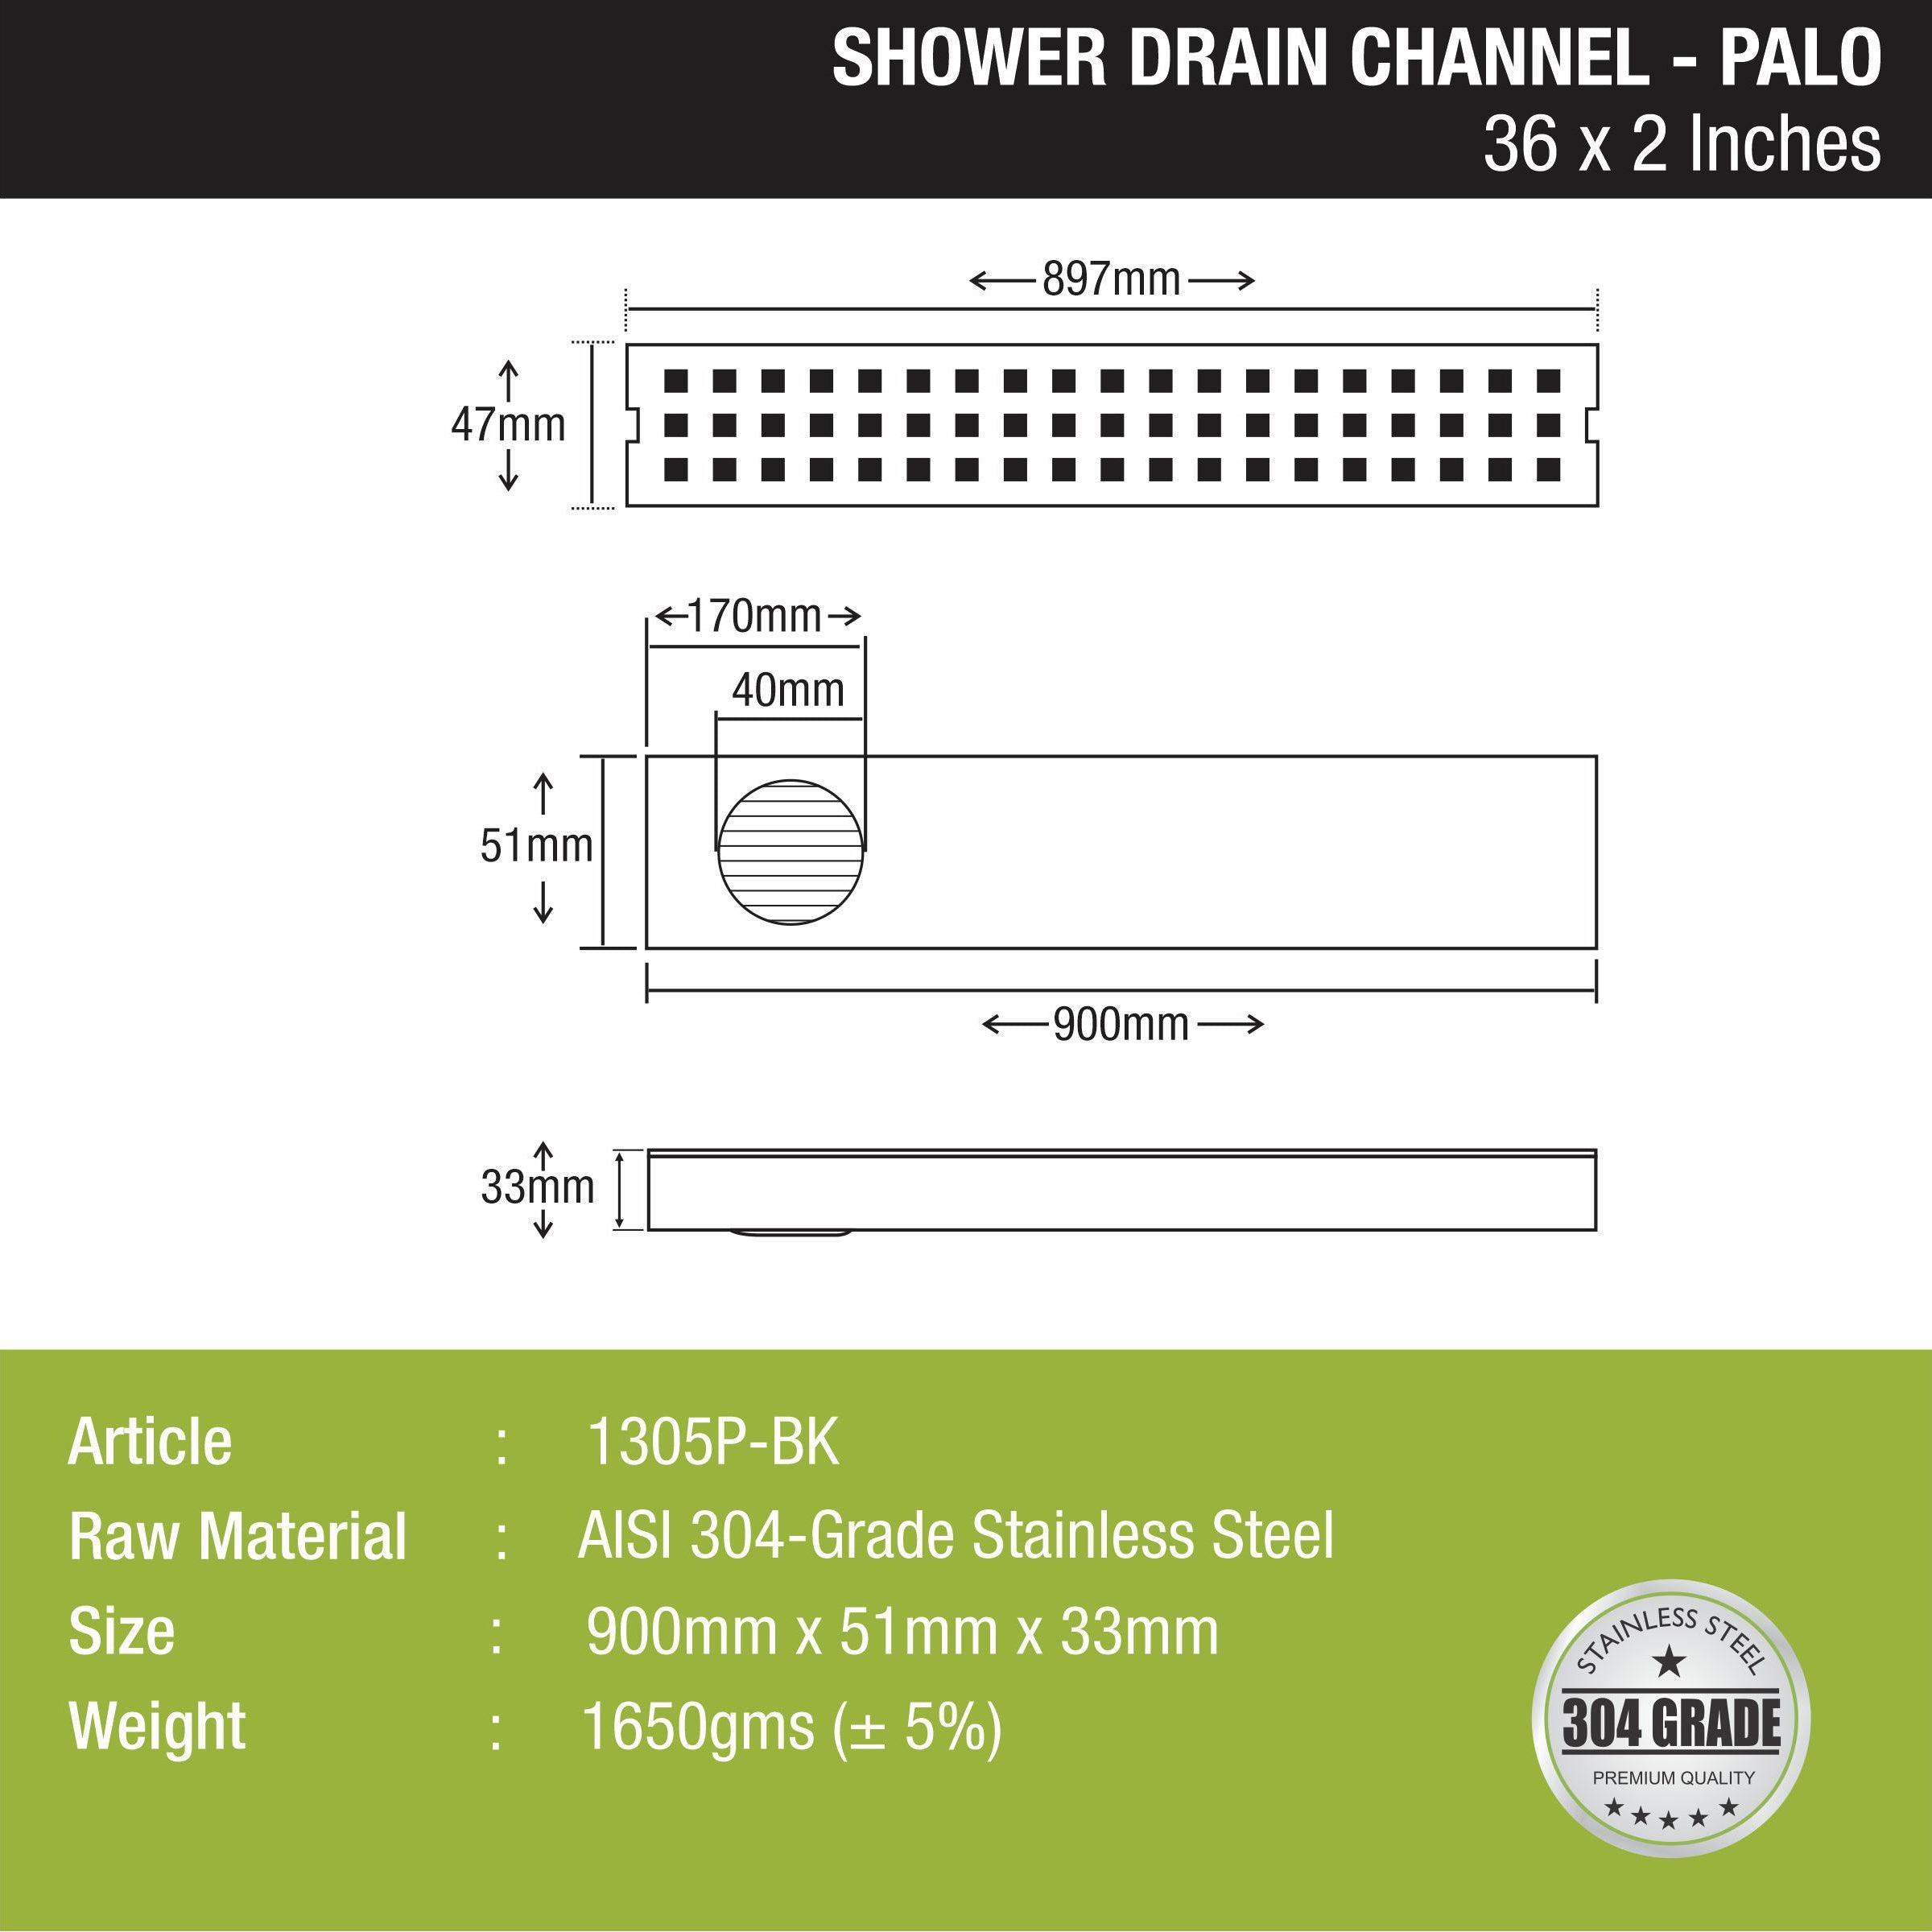 Palo Shower Drain Channel - Black (36 x 2 Inches) size and measurement